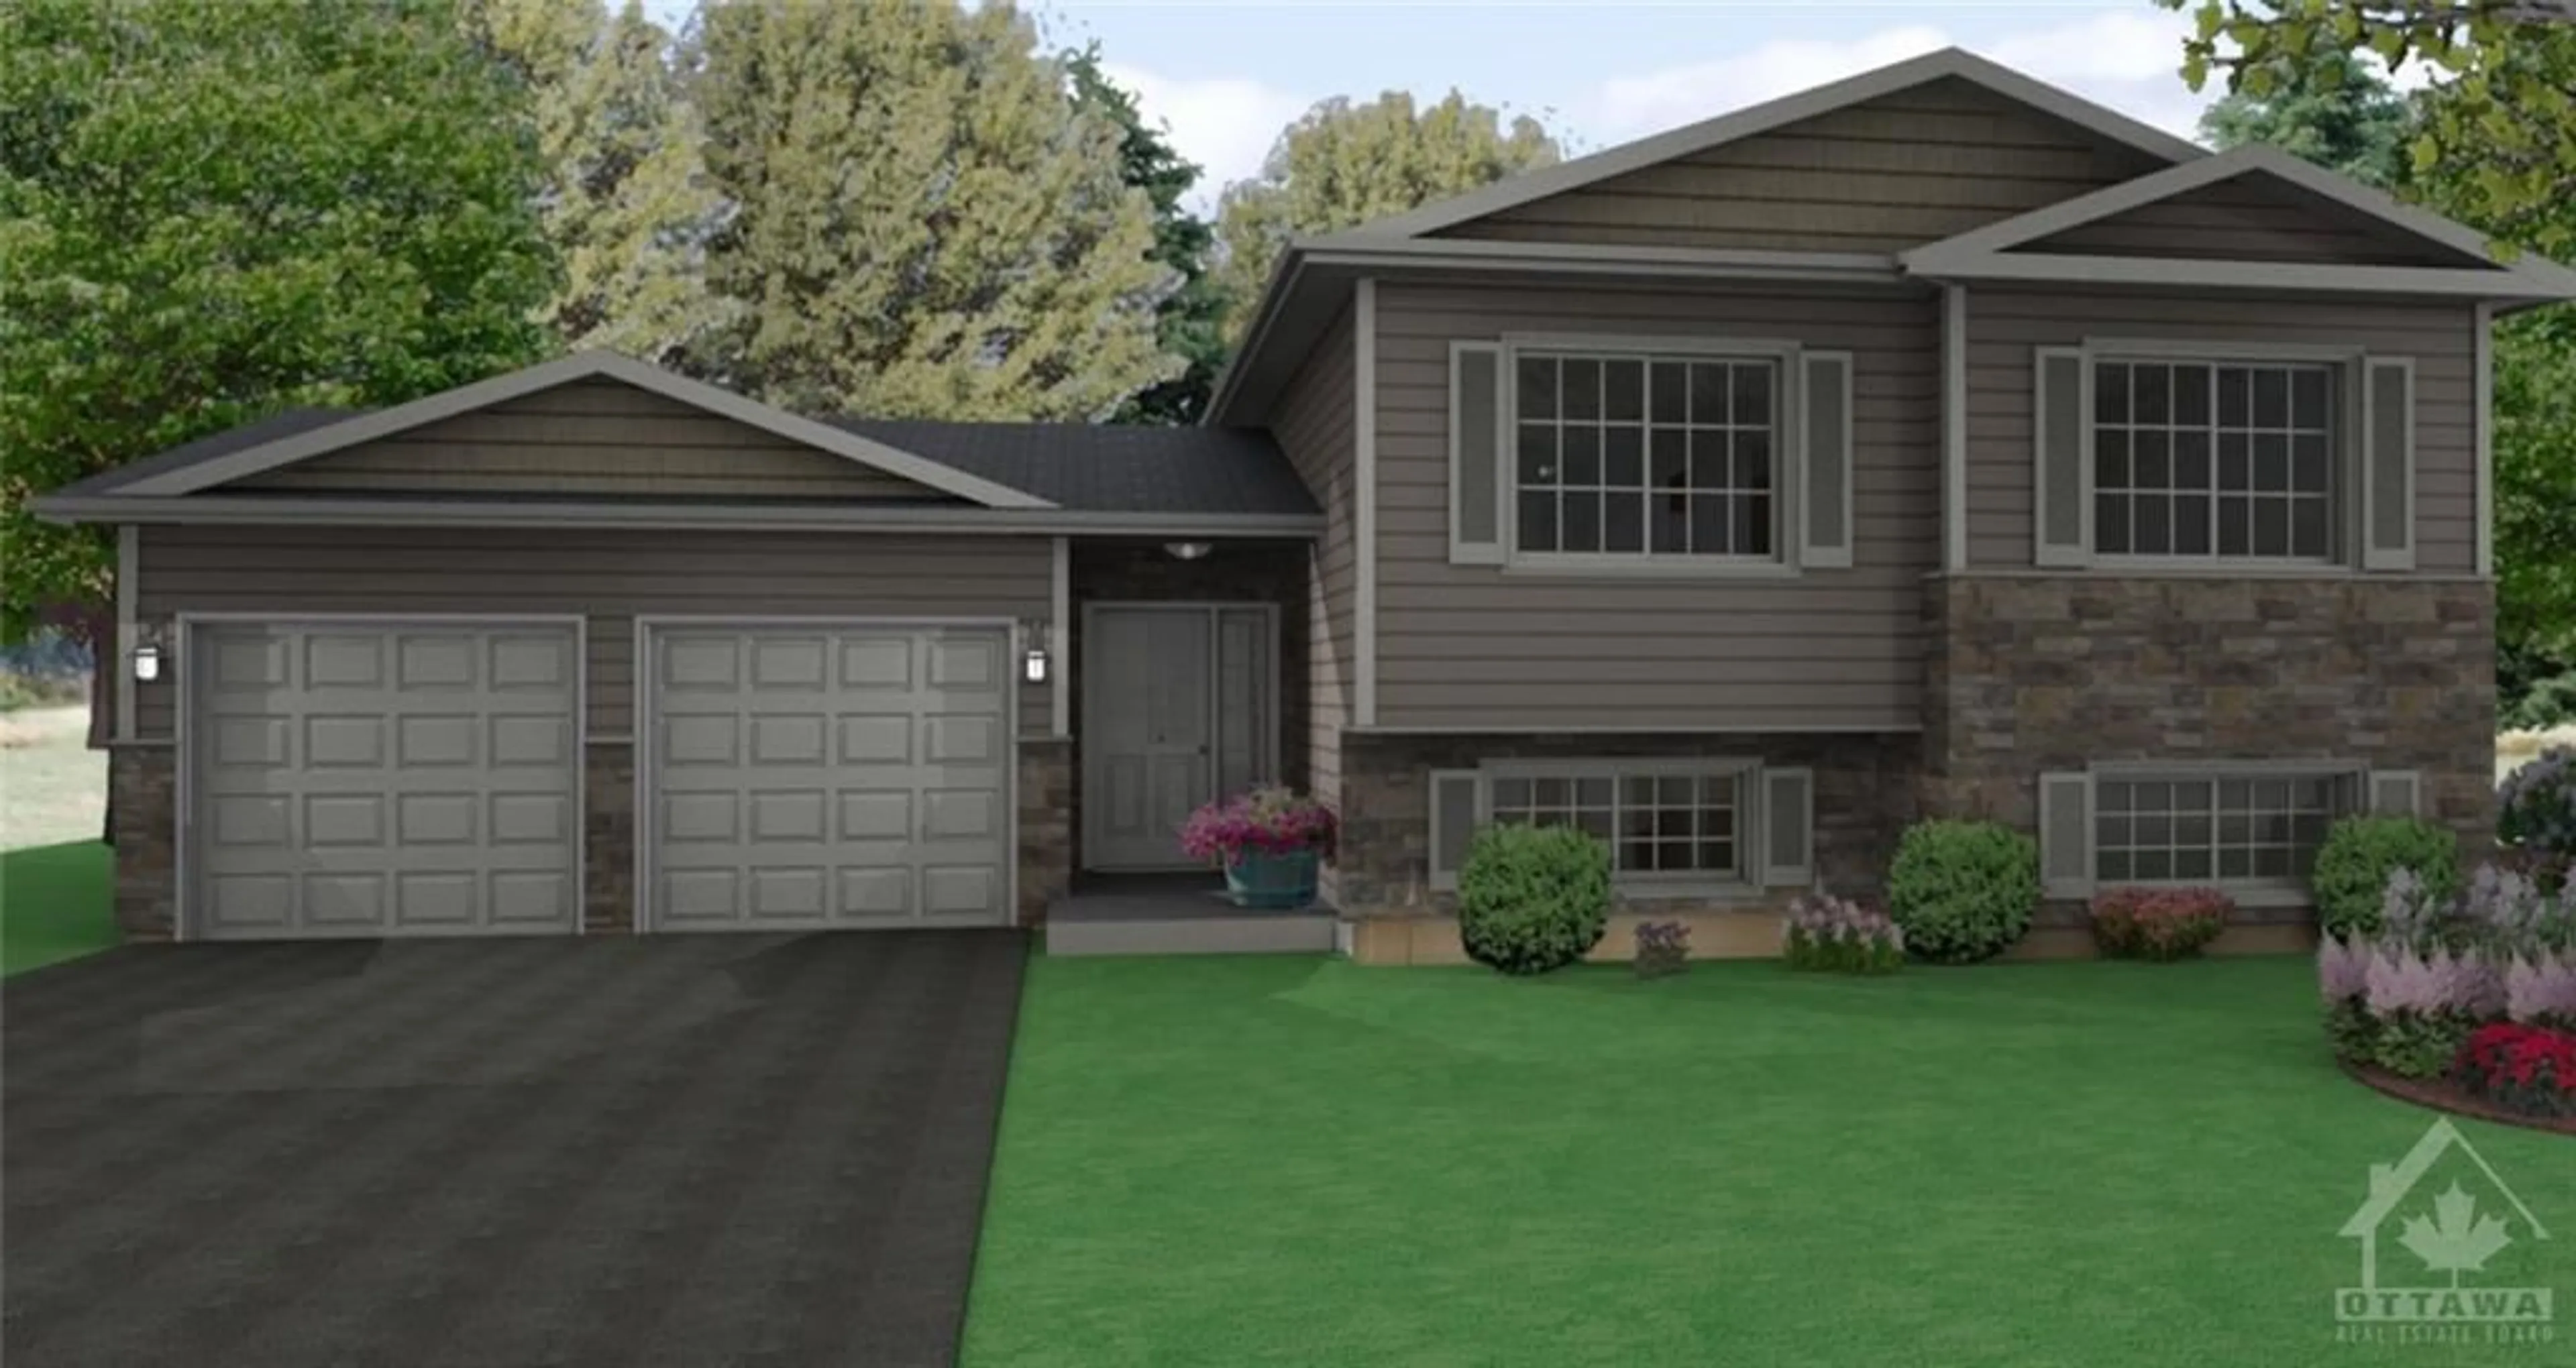 Home with vinyl exterior material for Lot 86(A) Rosedal Rd, Smiths Falls Ontario K7A 4S6